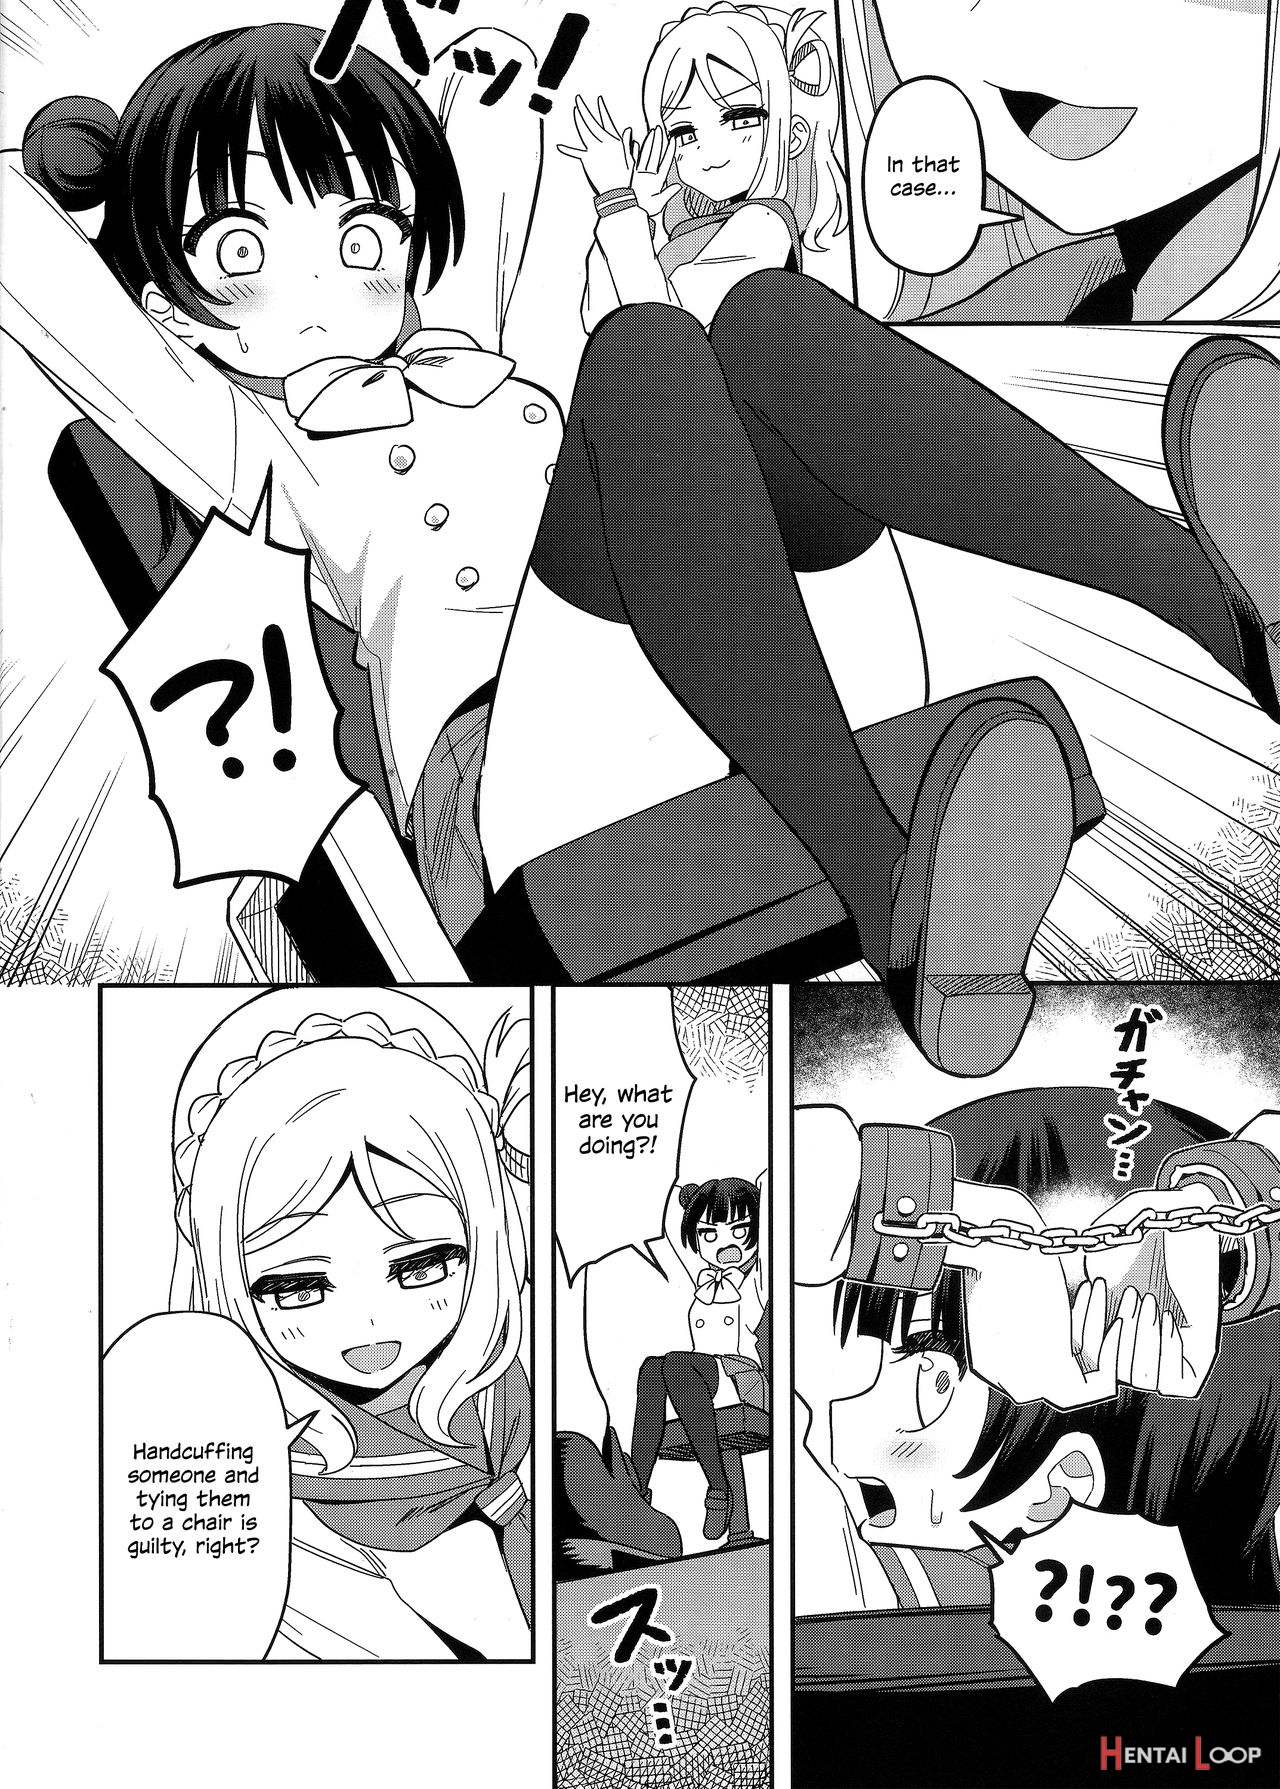 Fallen Angel-sama, Is This Guilty Too? page 7